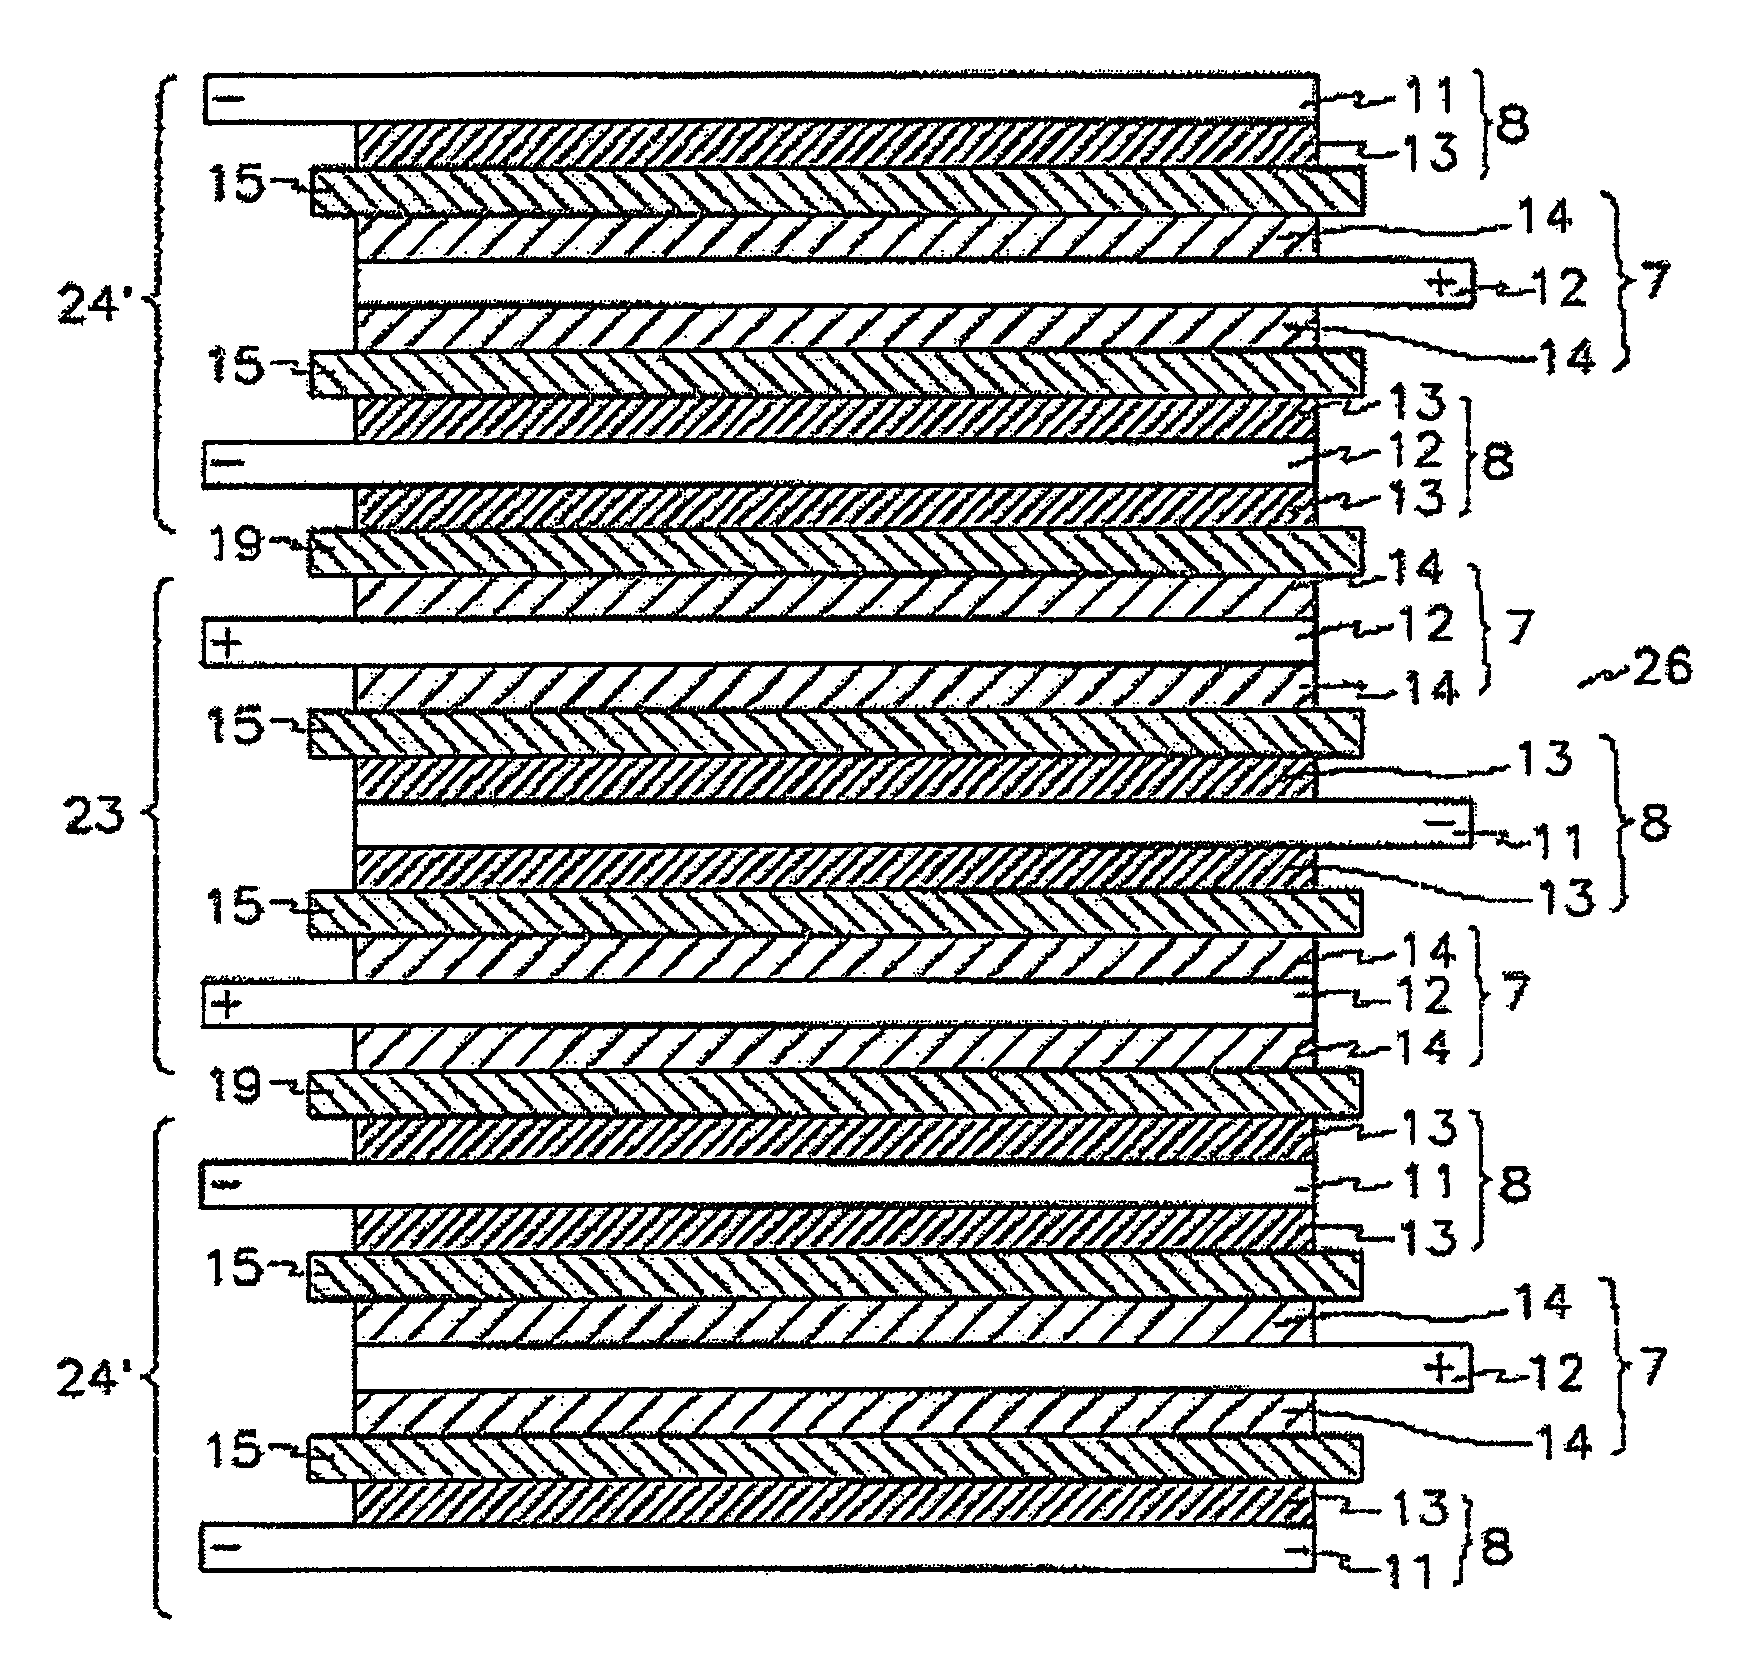 Polymer binder for electrochemical device comprising multiply stacked electrochemical cells